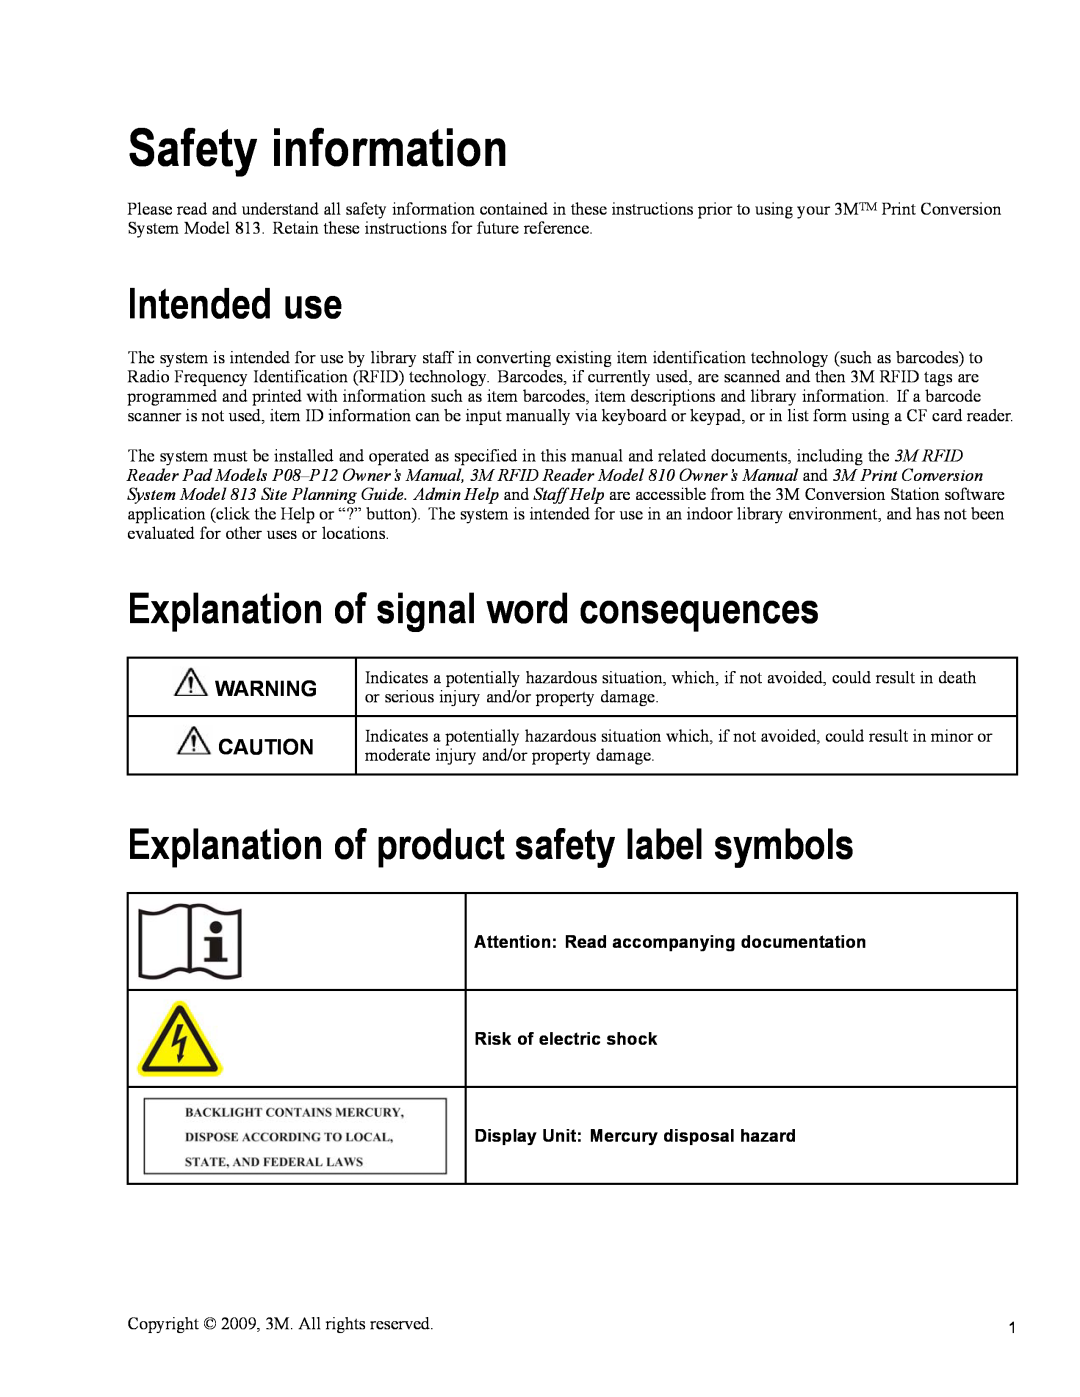 3M 813 Safety information, Intended use, Explanation of signal word consequences, Display Unit Mercury disposal hazard 